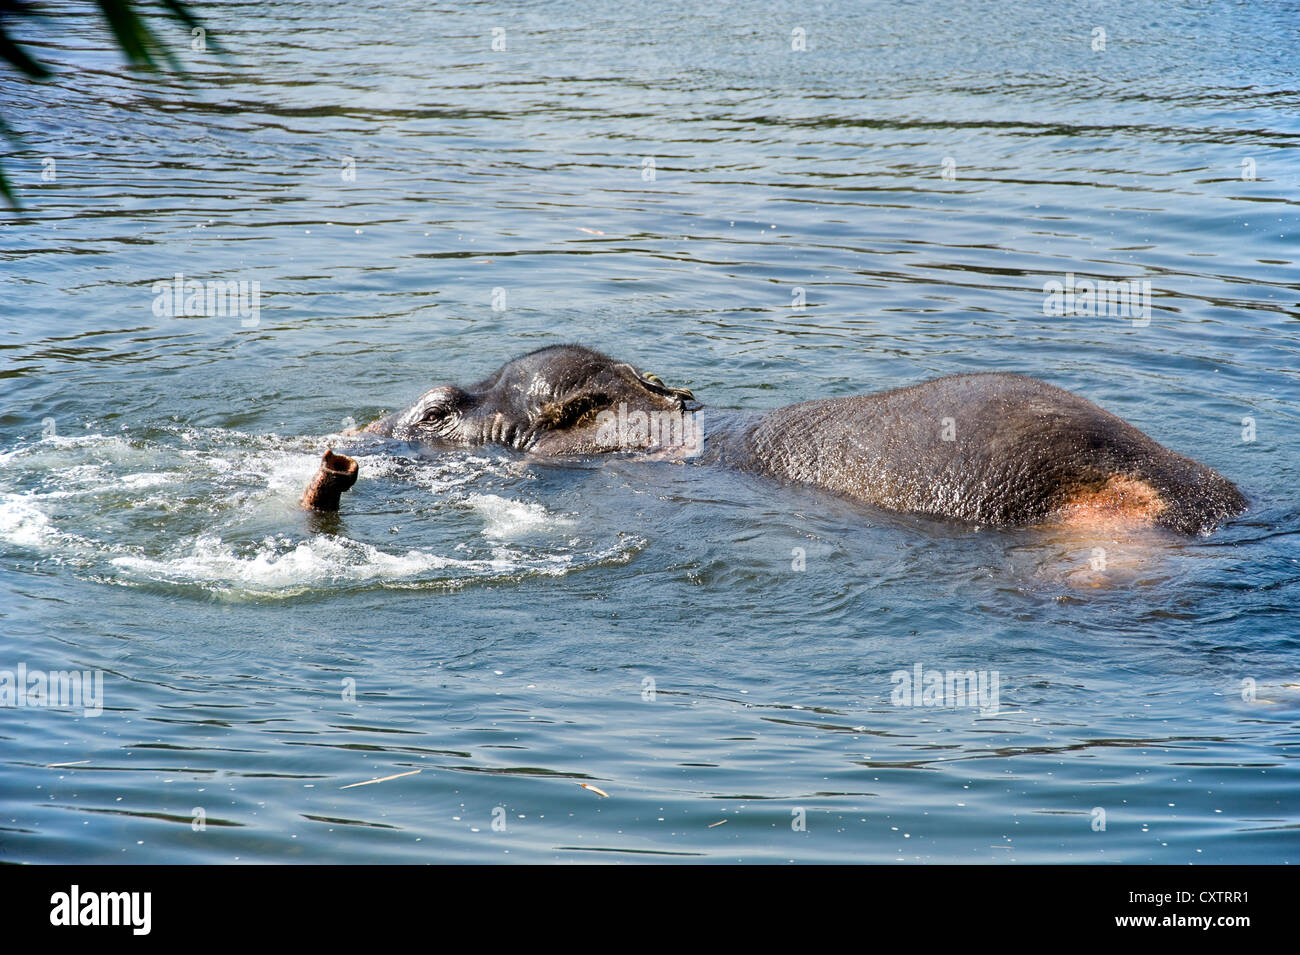 Horizontal view of a young Asian elephant playing in the Periyar river at a sanctuary in Kerala. Stock Photo